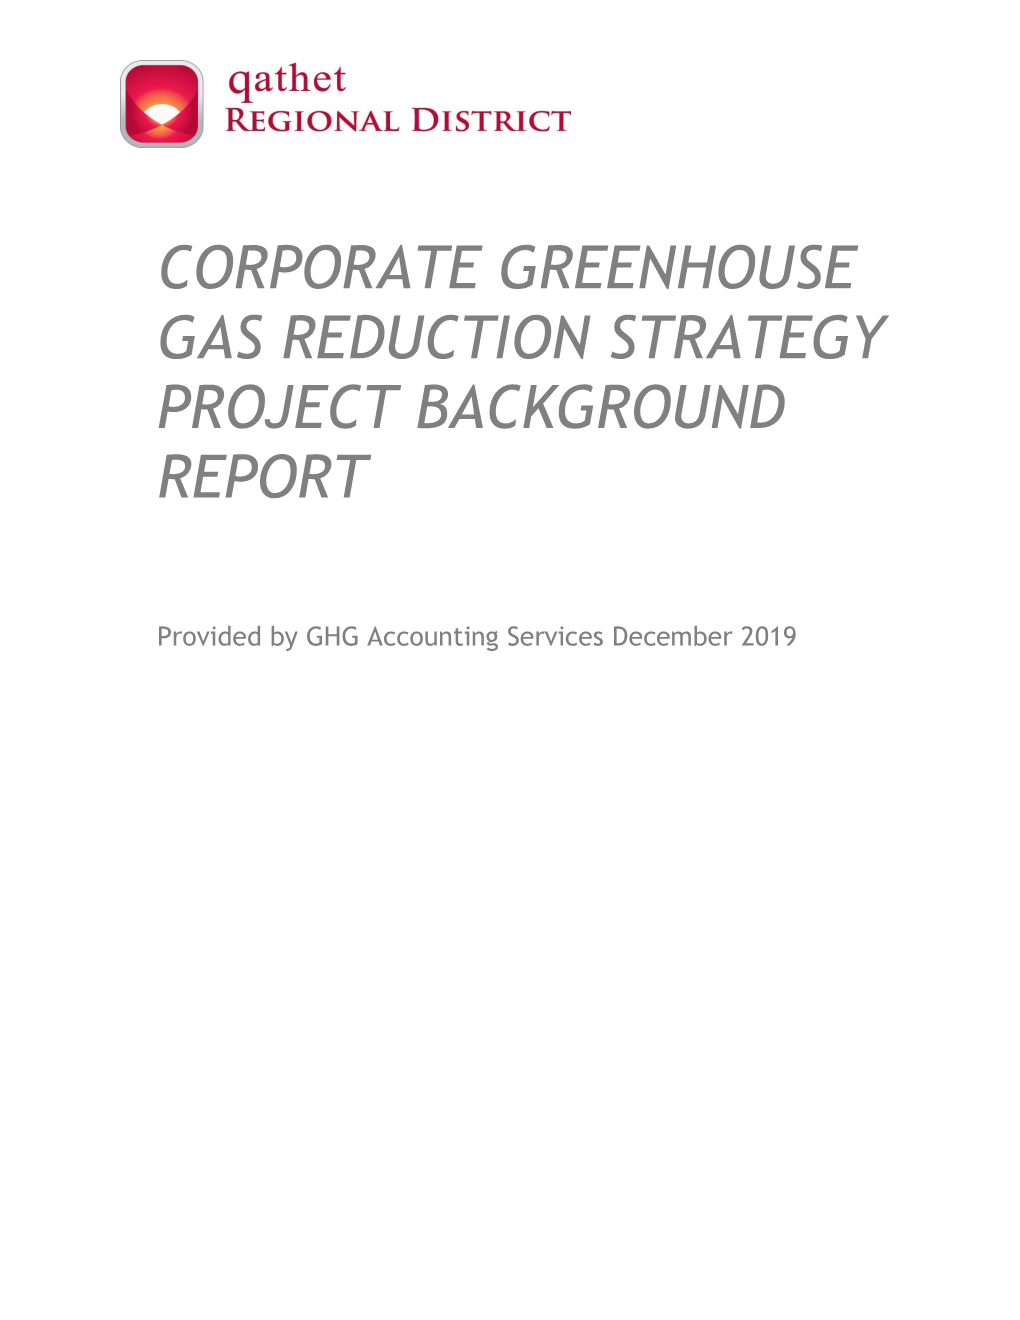 Corporate Greenhouse Gas Reduction Strategy Project Background Report